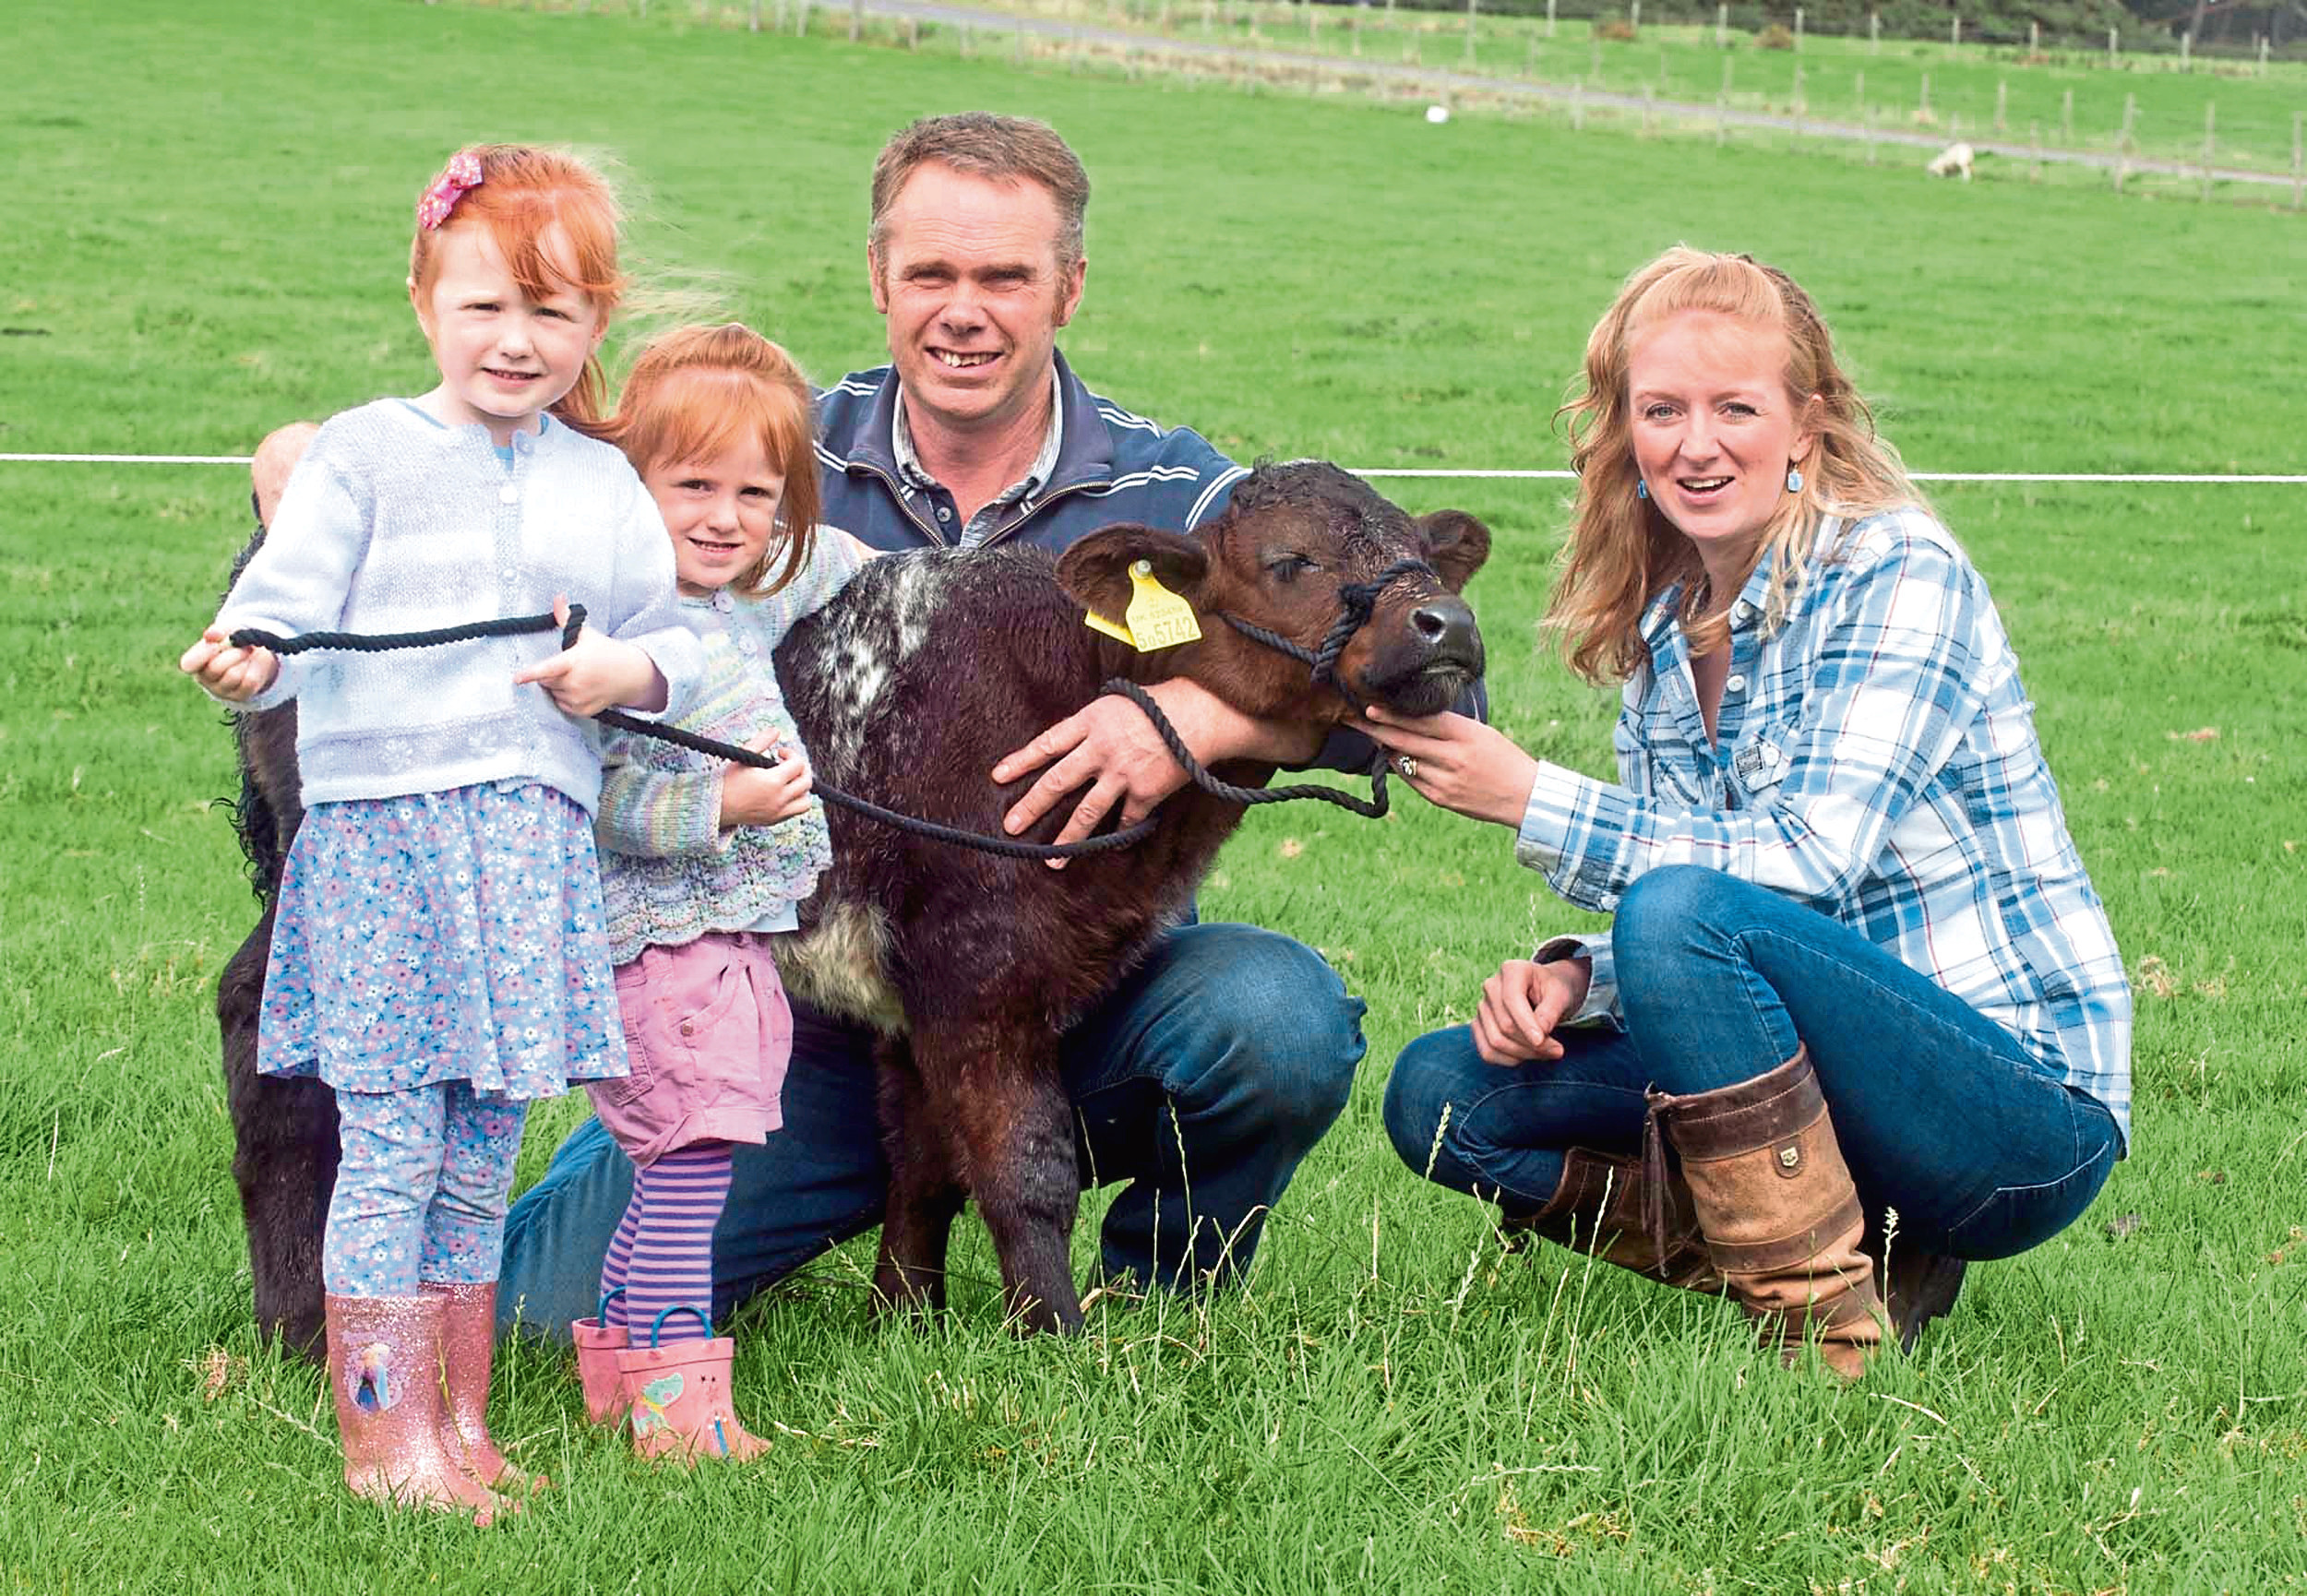 Andrew Anderson of Smallburn Farms with daughters Lucy and Chlo and his wife Judy.